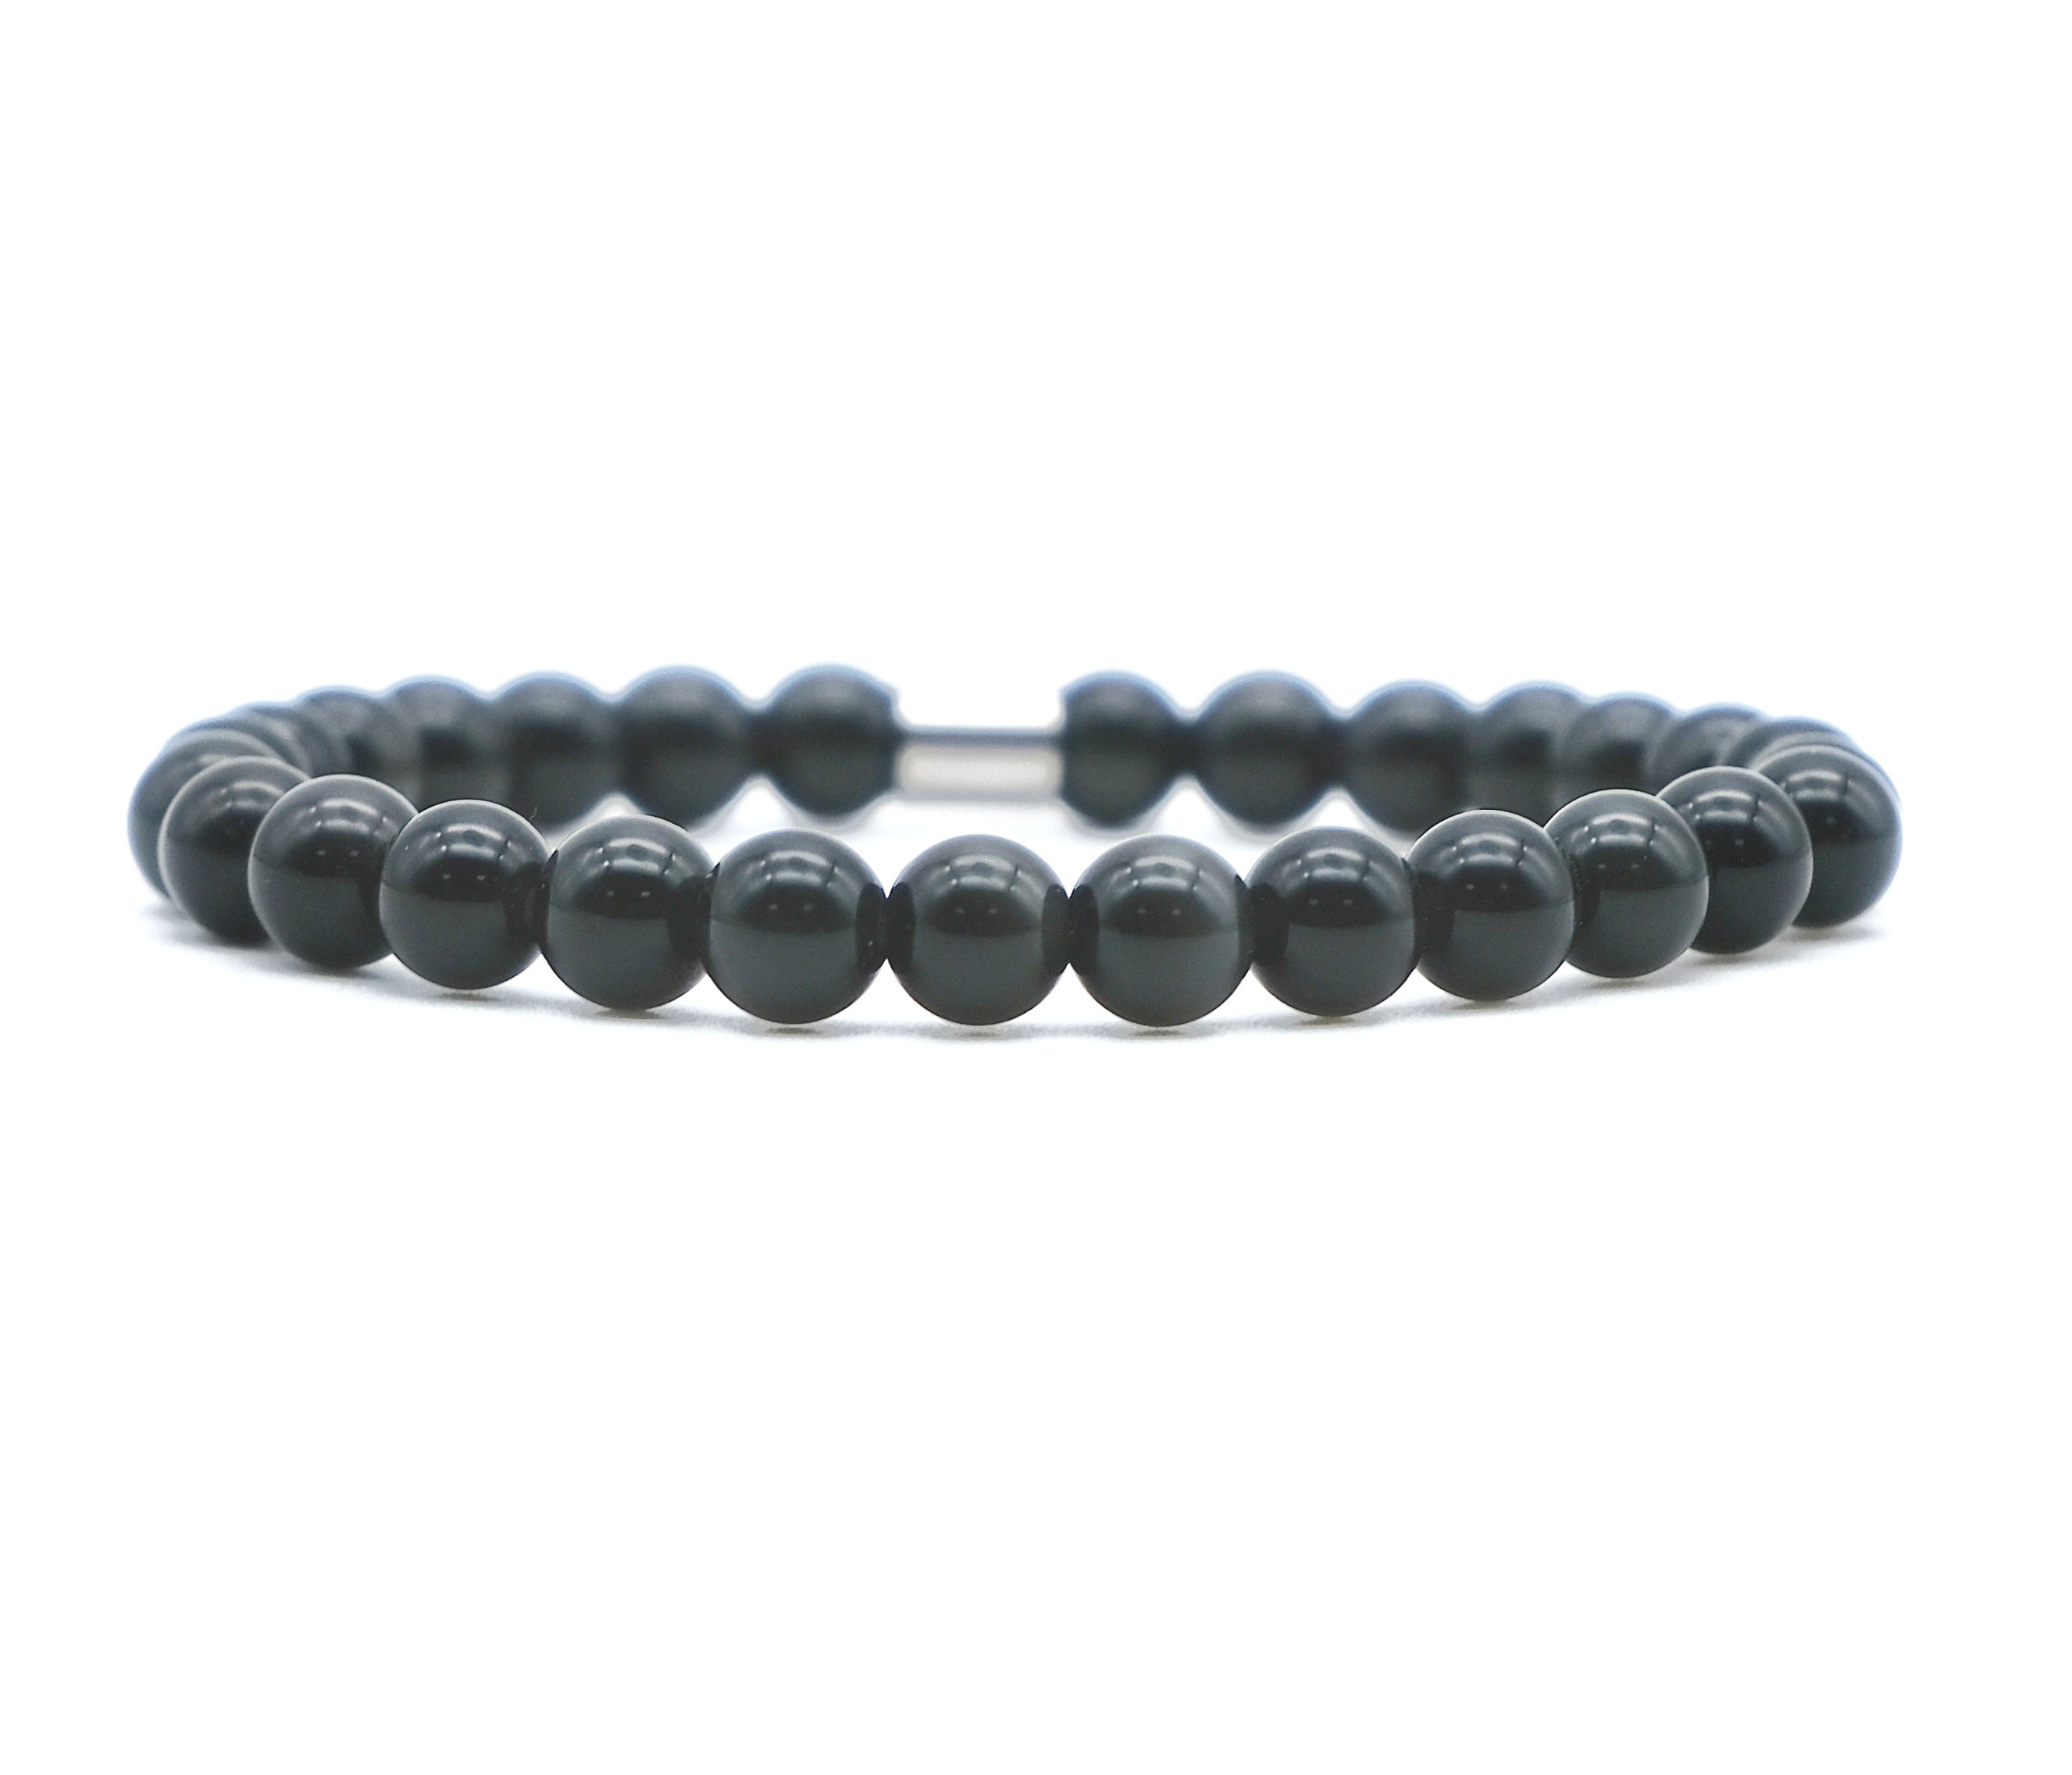 6mm Black Obsidian Bracelet with a stainless steel accessory